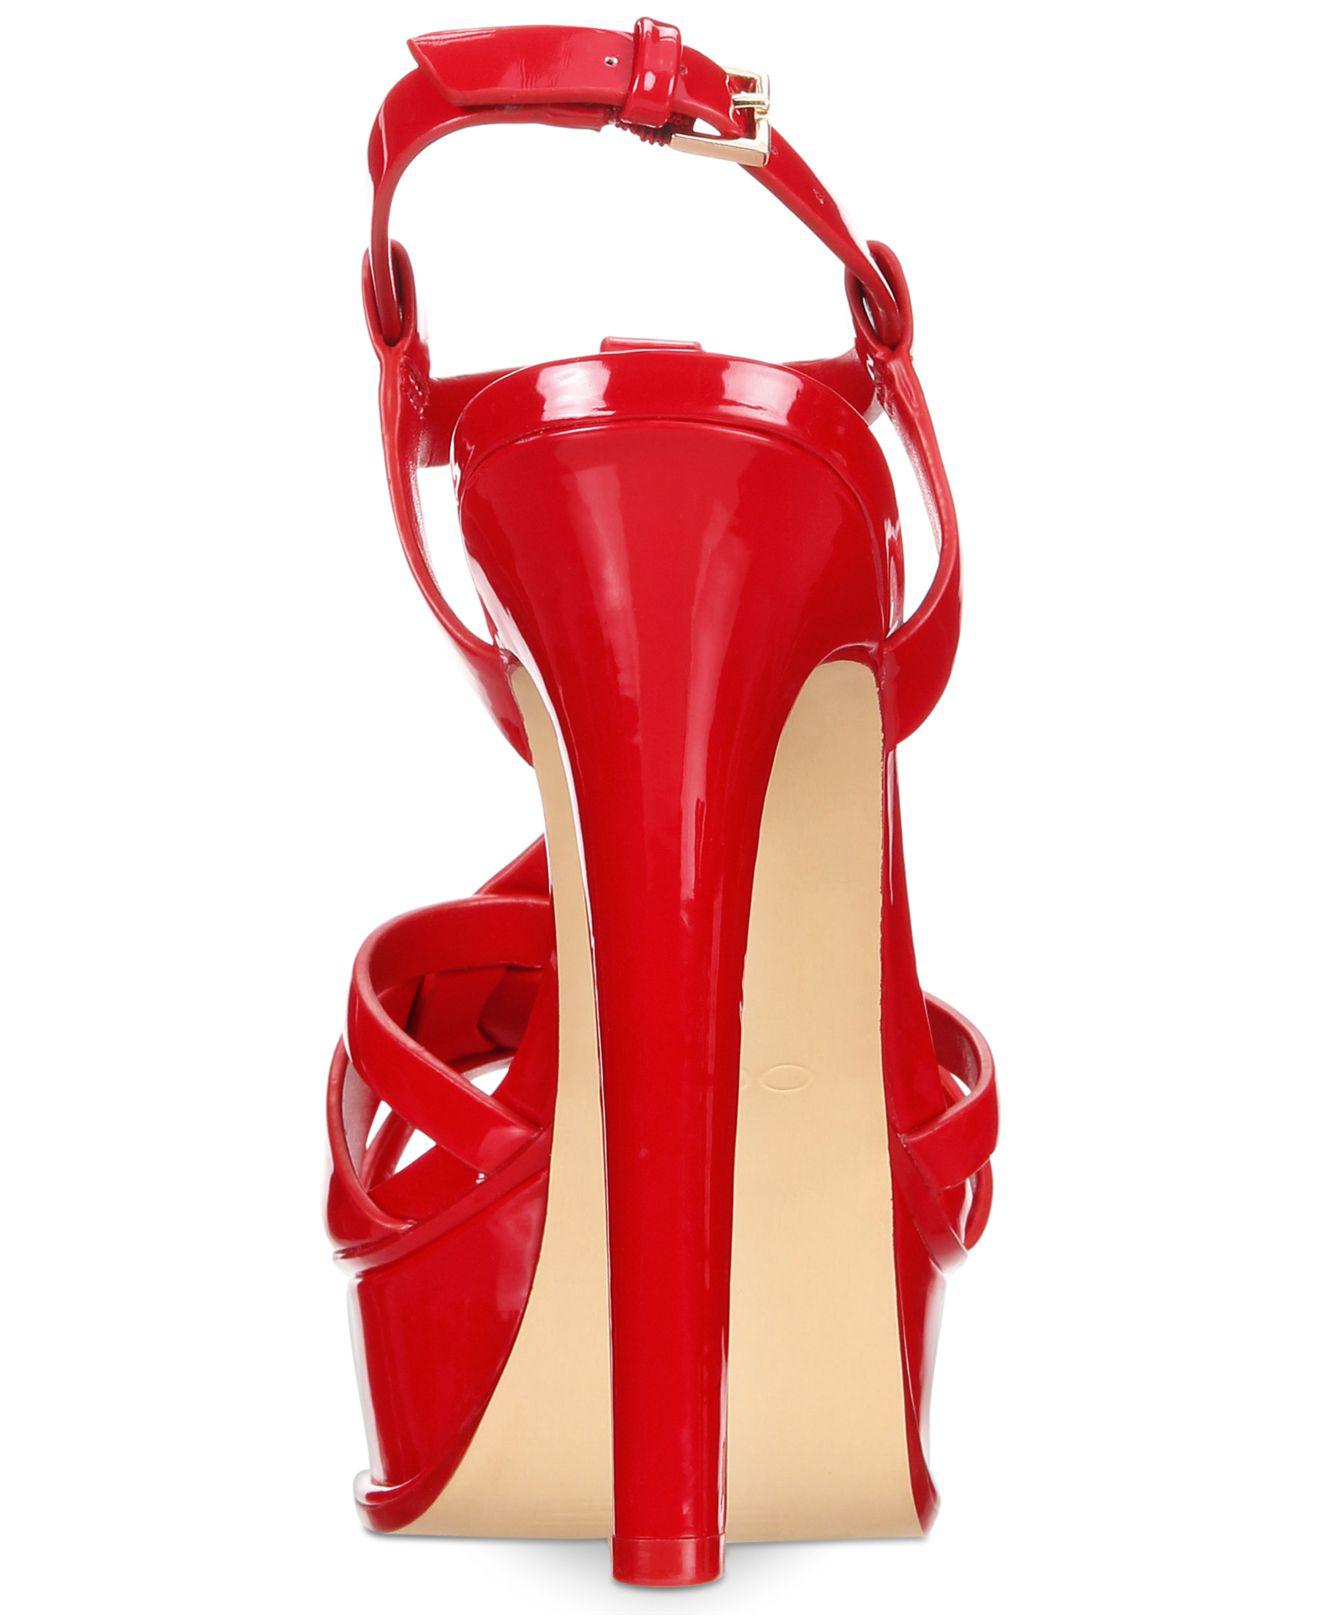 ALDO Chelly Platform Dress Sandals in Red Patent (Red) - Lyst